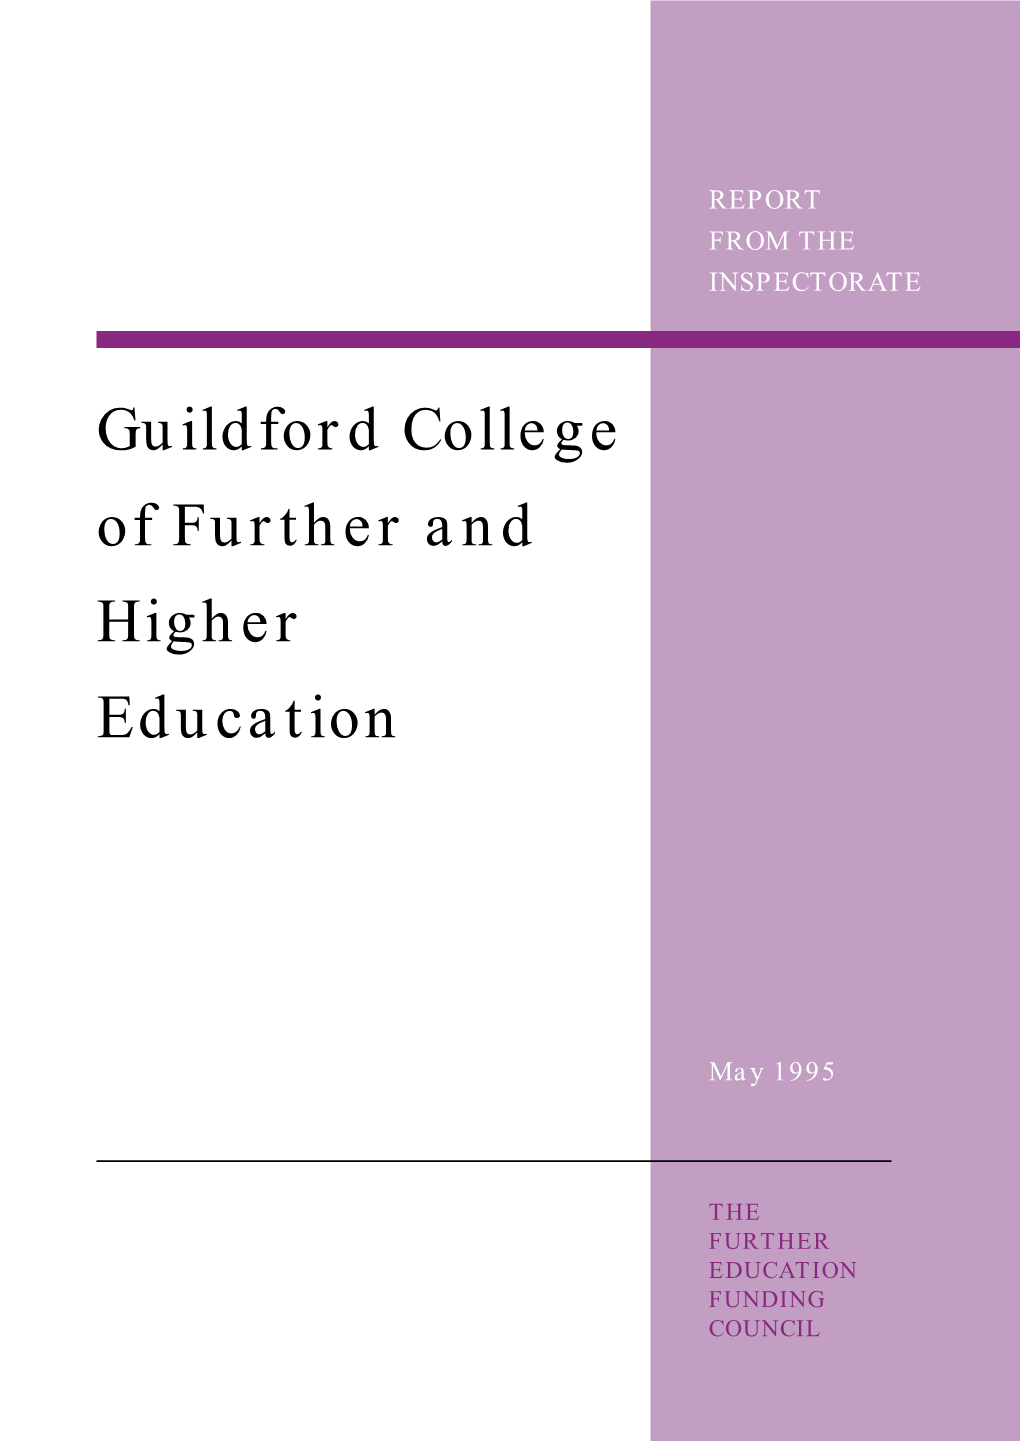 Guildford College of Further and Higher Education